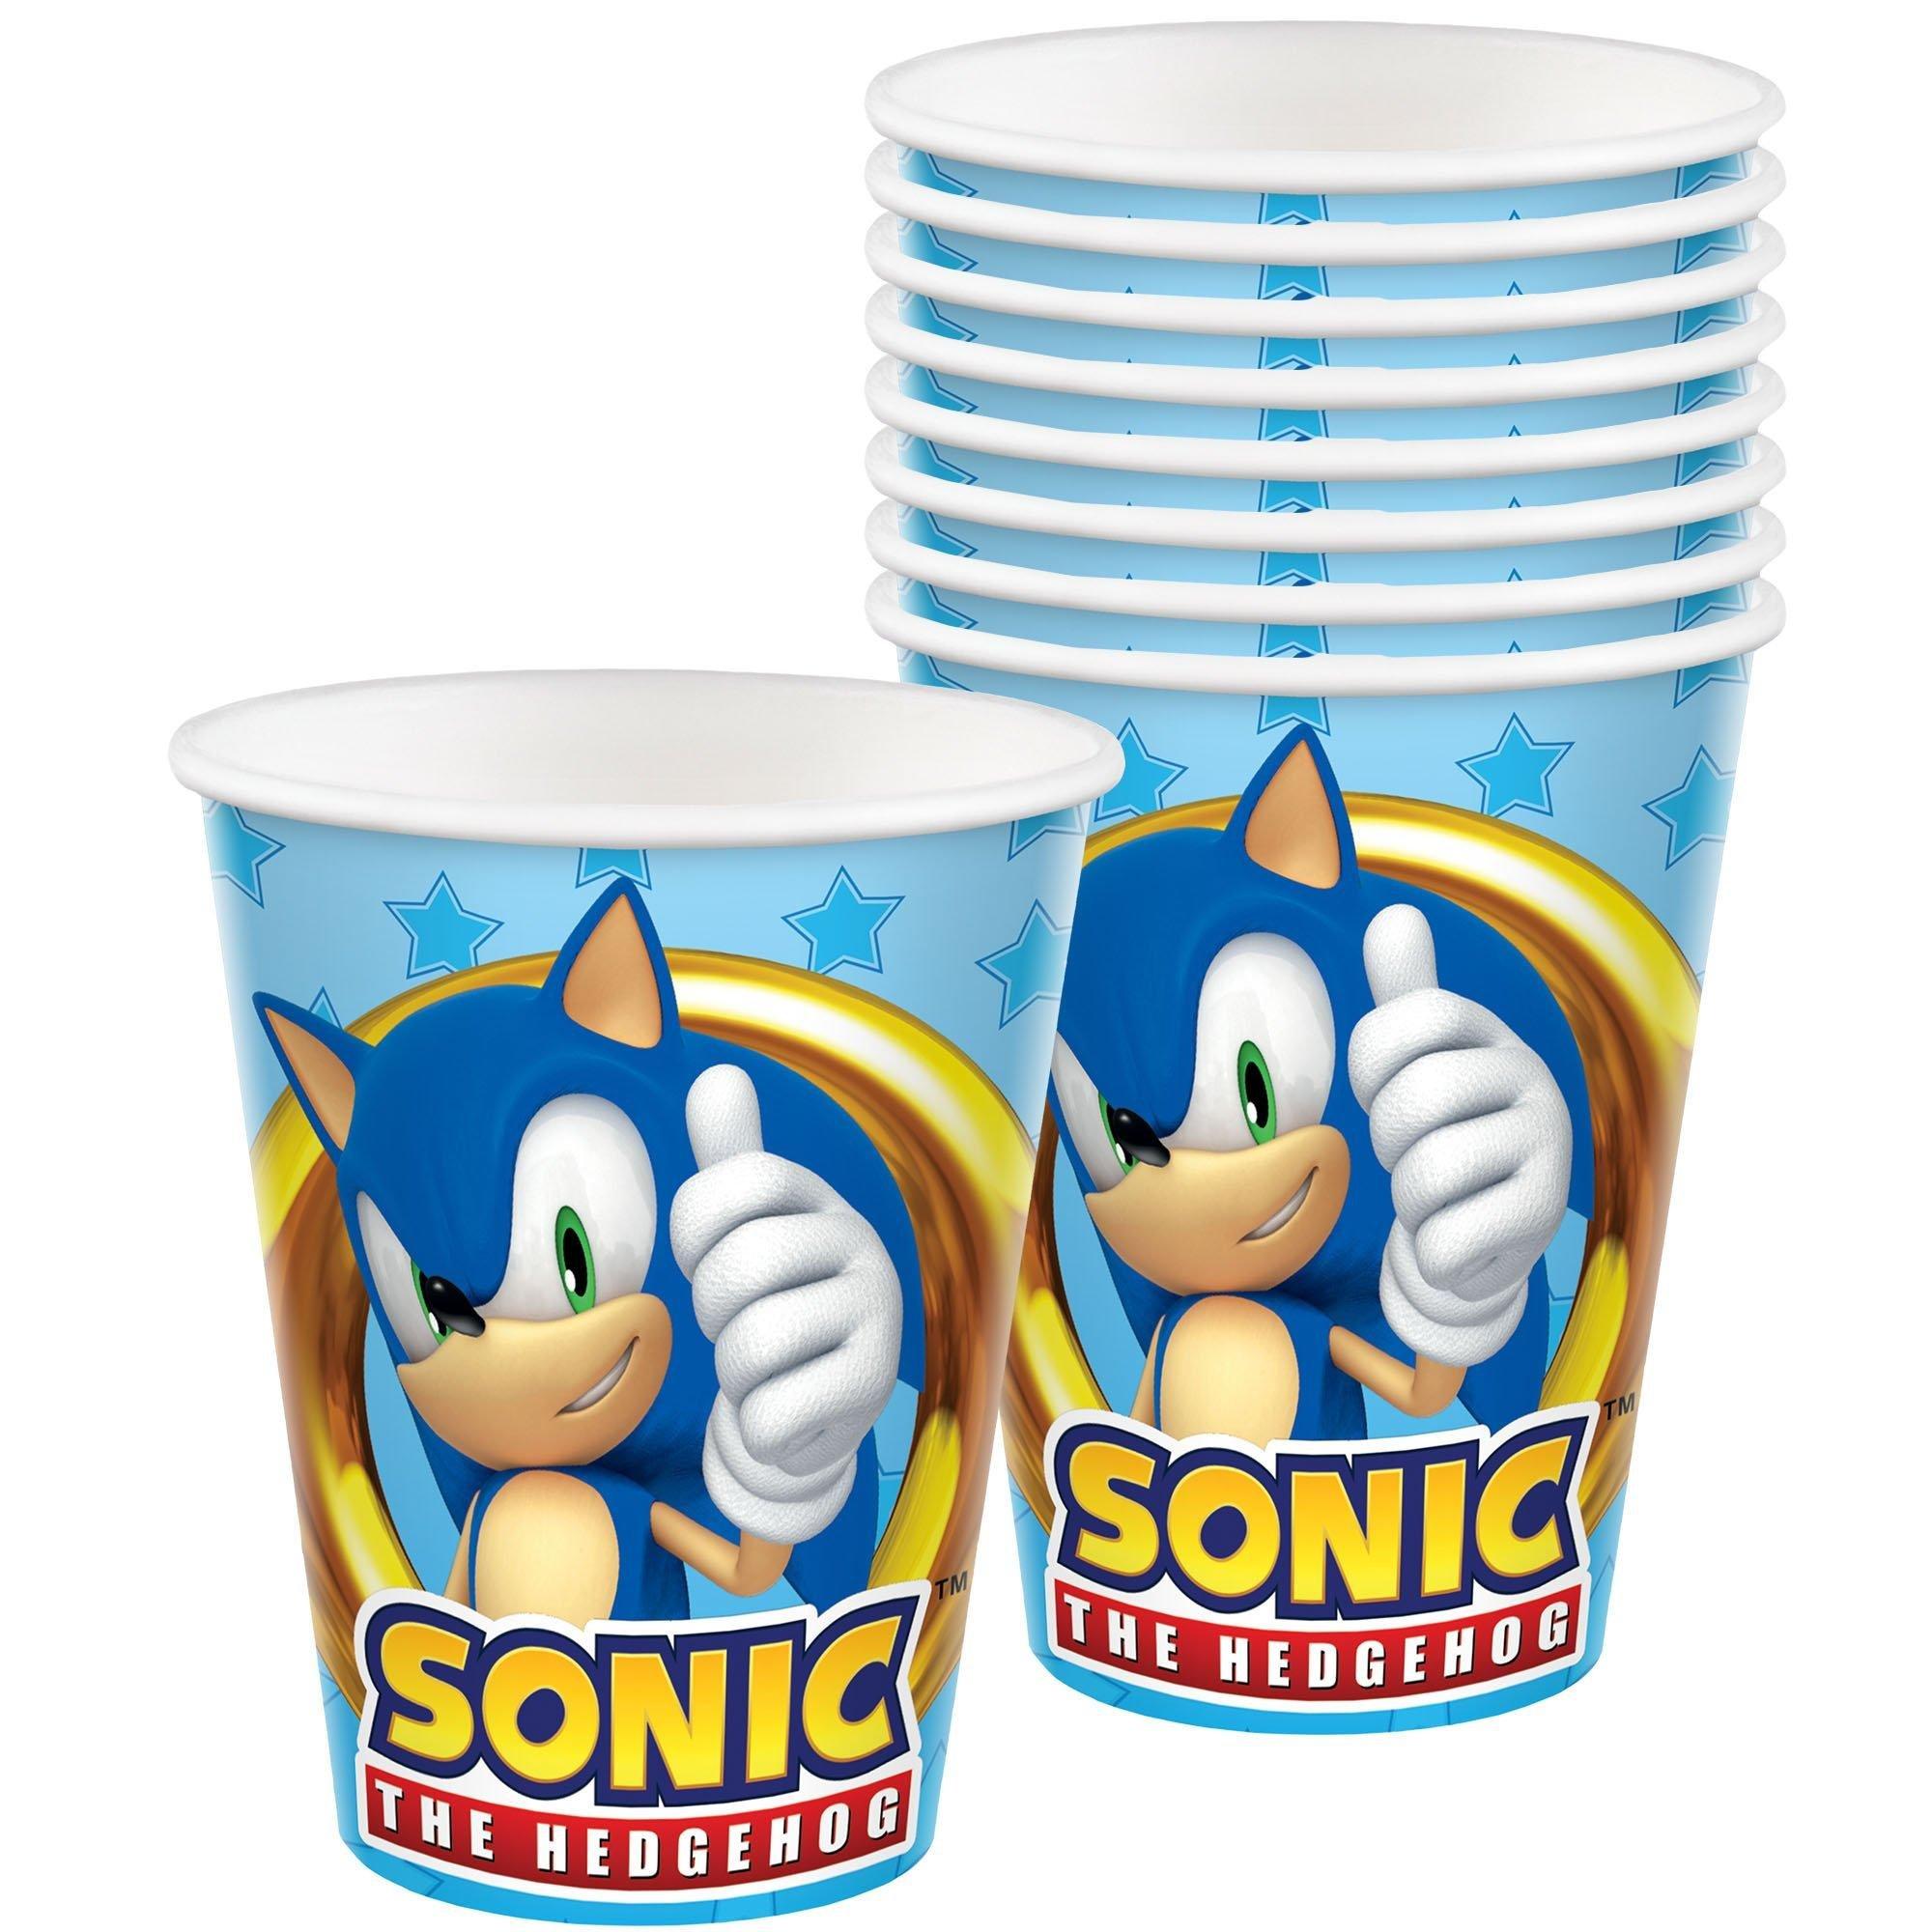 Sonic the Hedgehog Birthday Party Supplies Pack for 8 Guests - Kit Includes Plates, Napkins, Cups, Table Cover, Scene Setter, Photo Booth Props, Themed Latex Balloons & Favor Cup